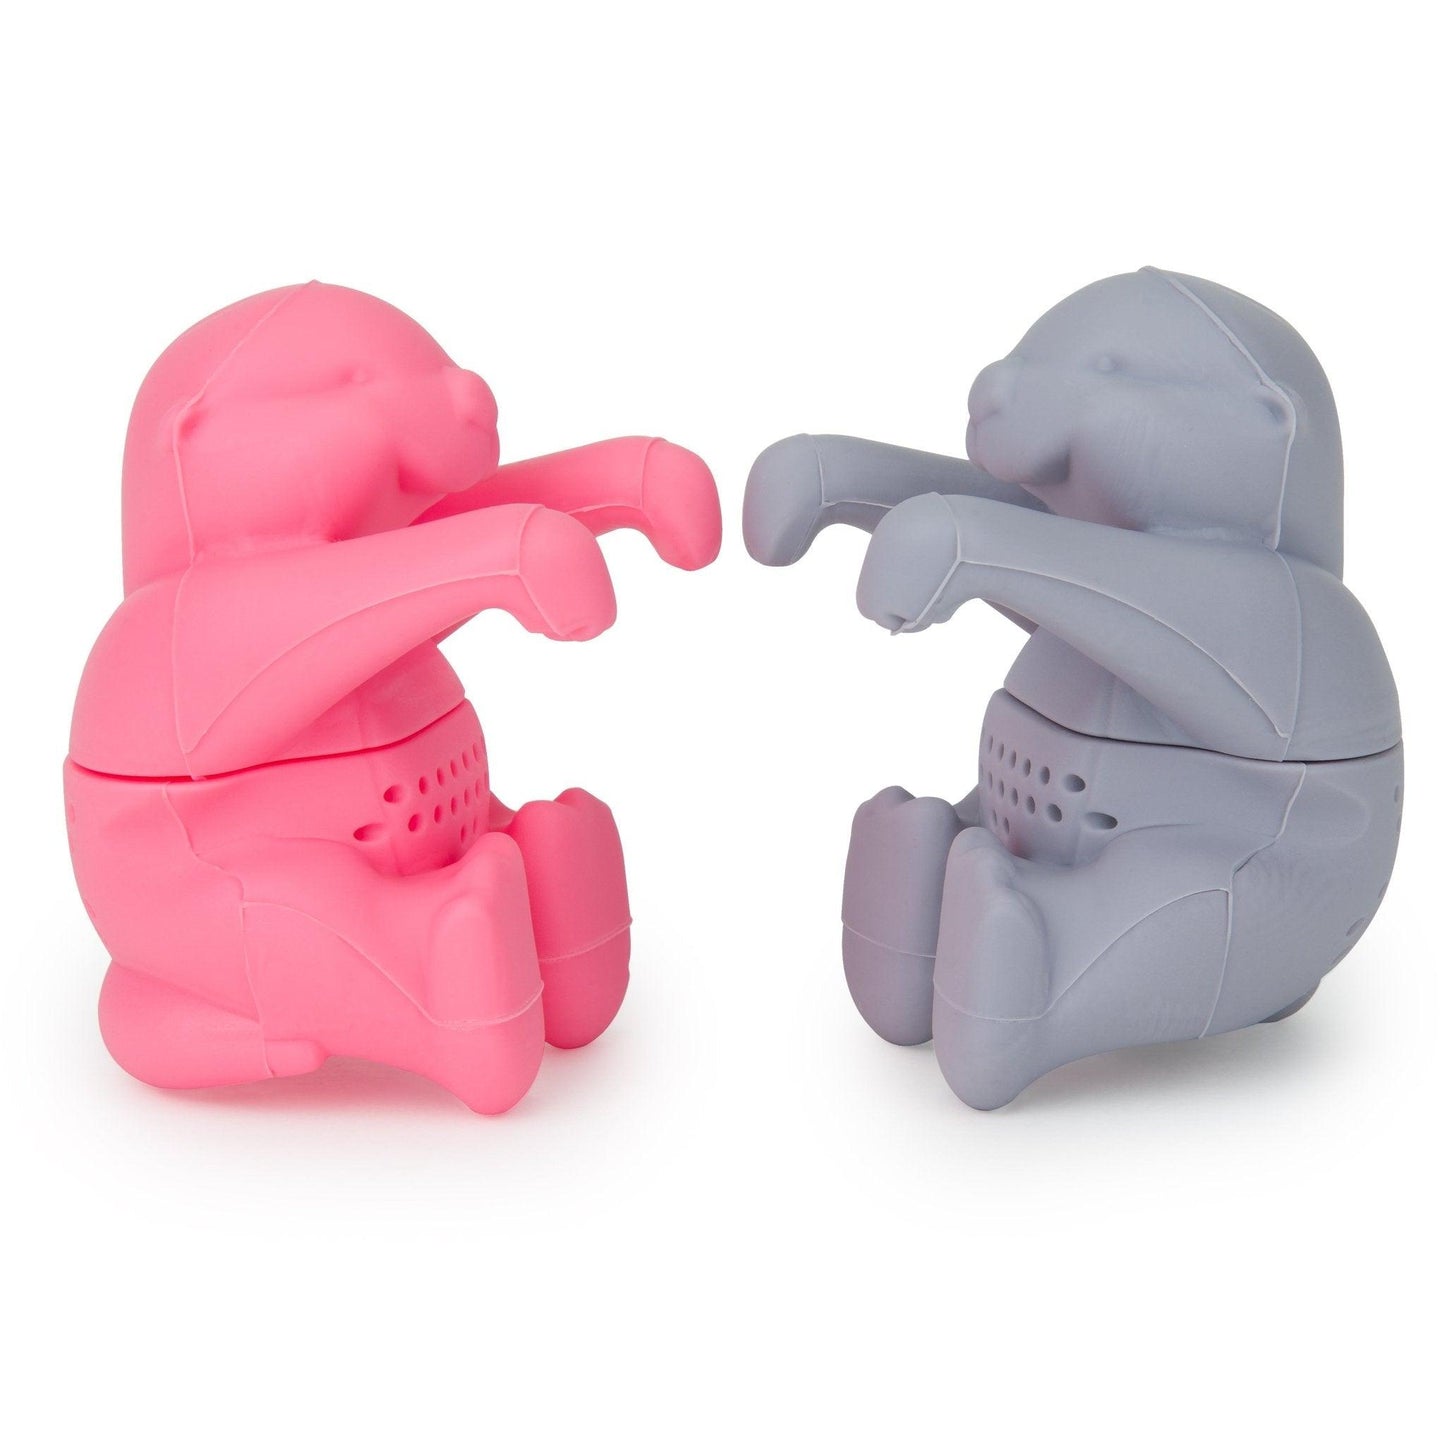 Cute silicone tea strainers for tea lovers